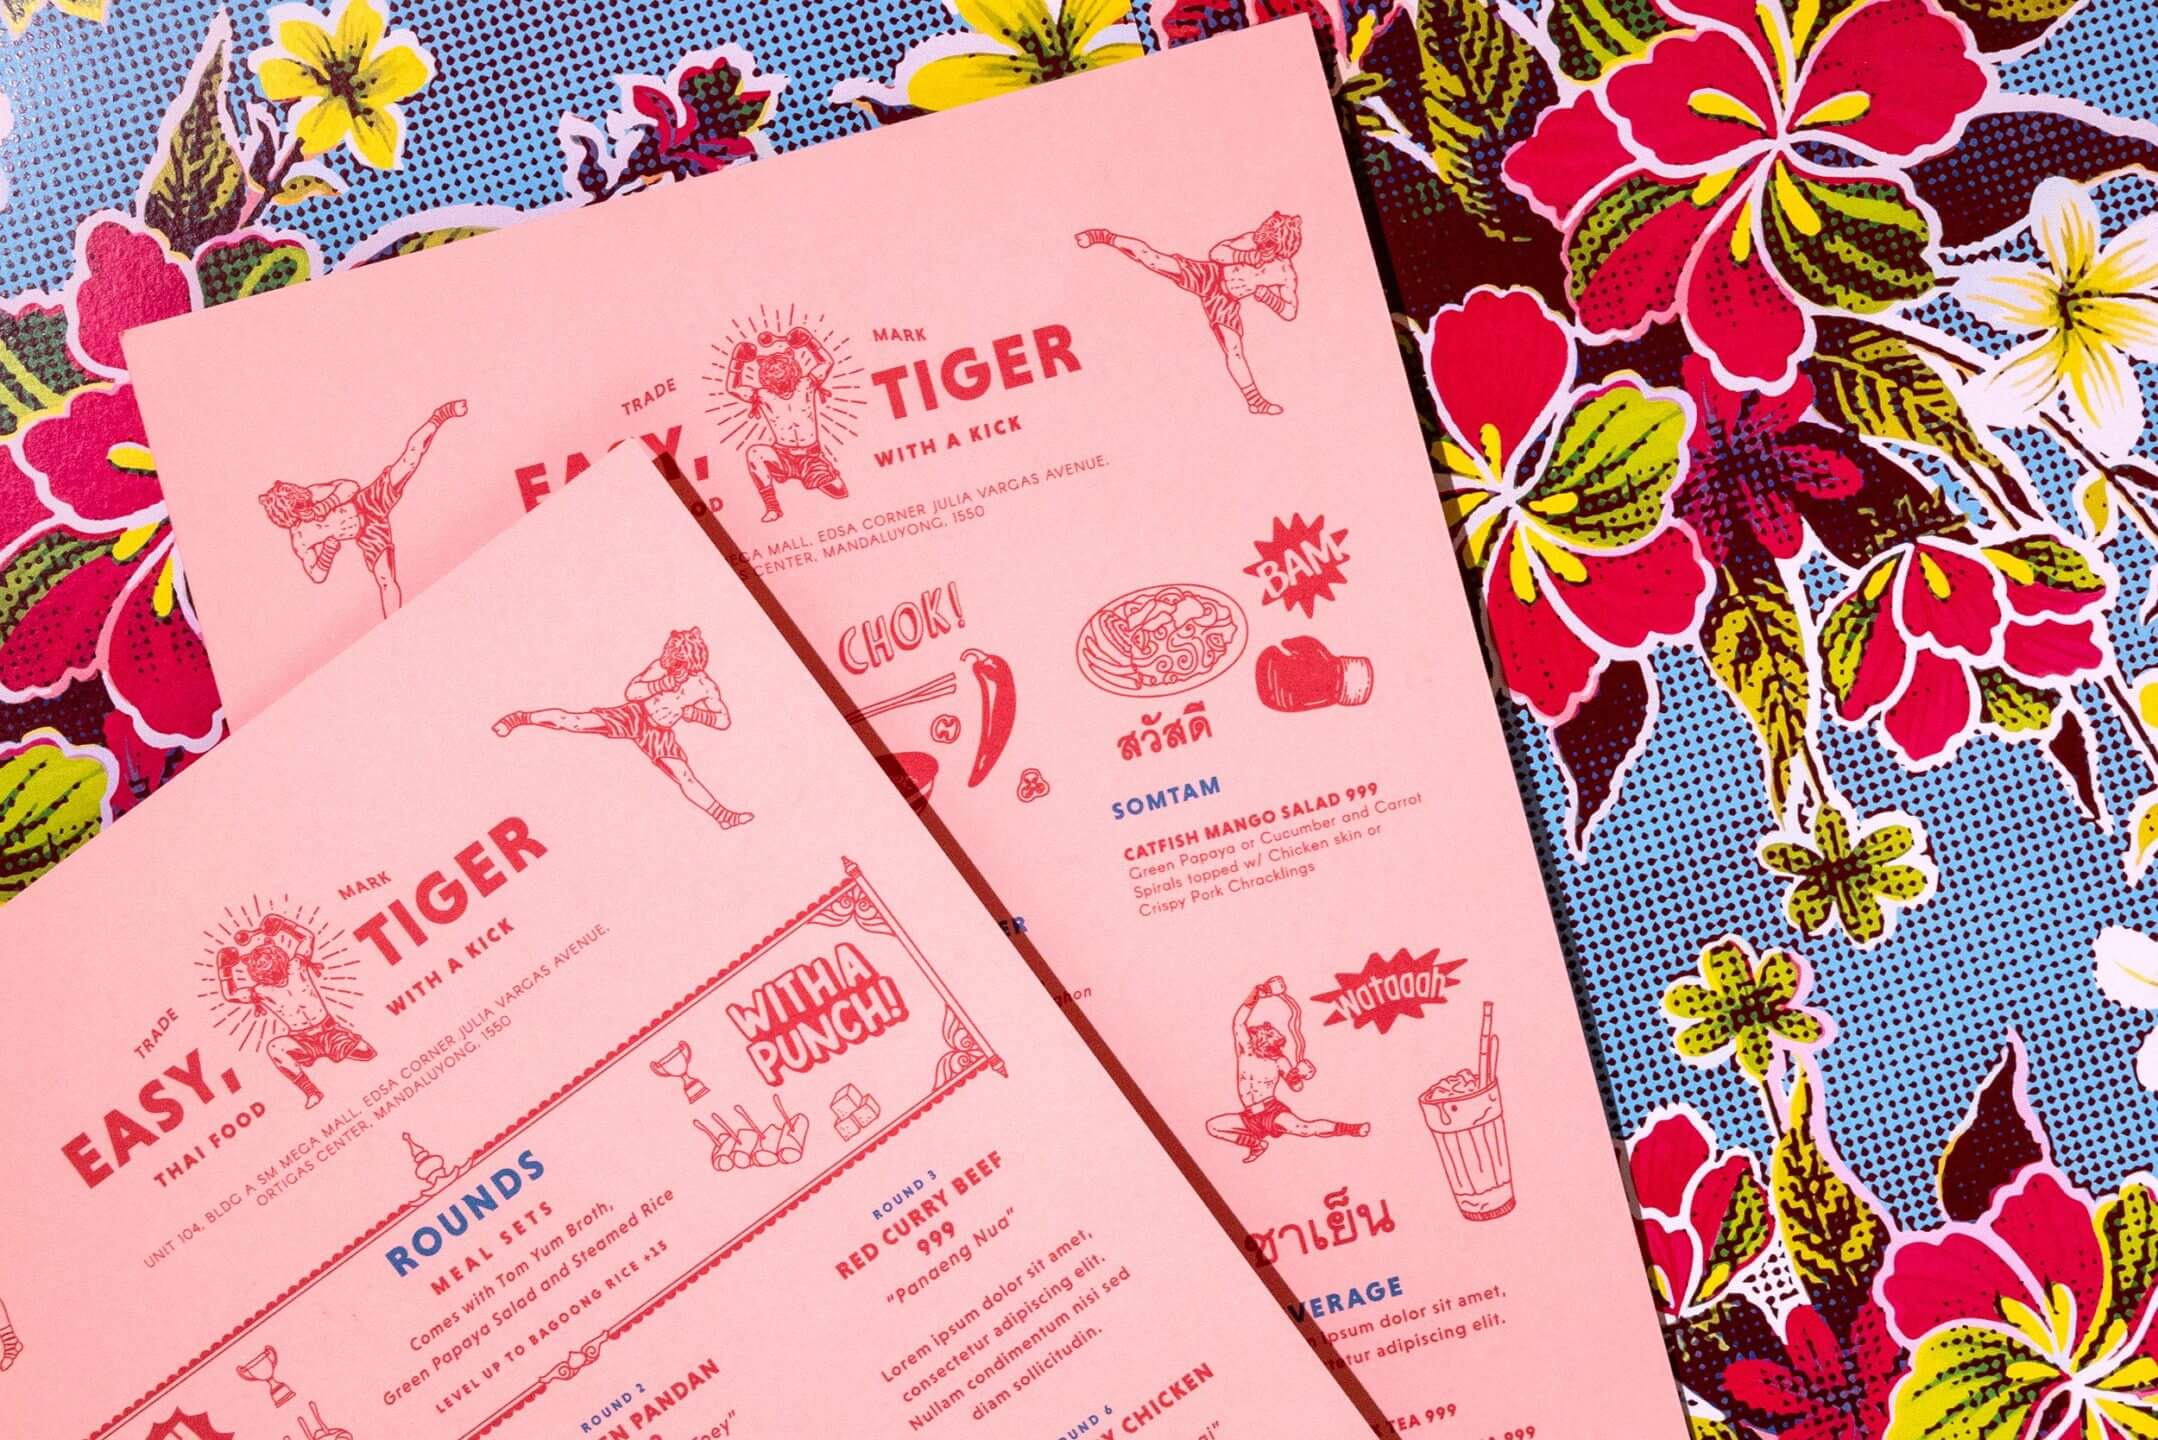 Menu layout and design with quirky illustrations for Thai food and beverage brand Easy Tiger